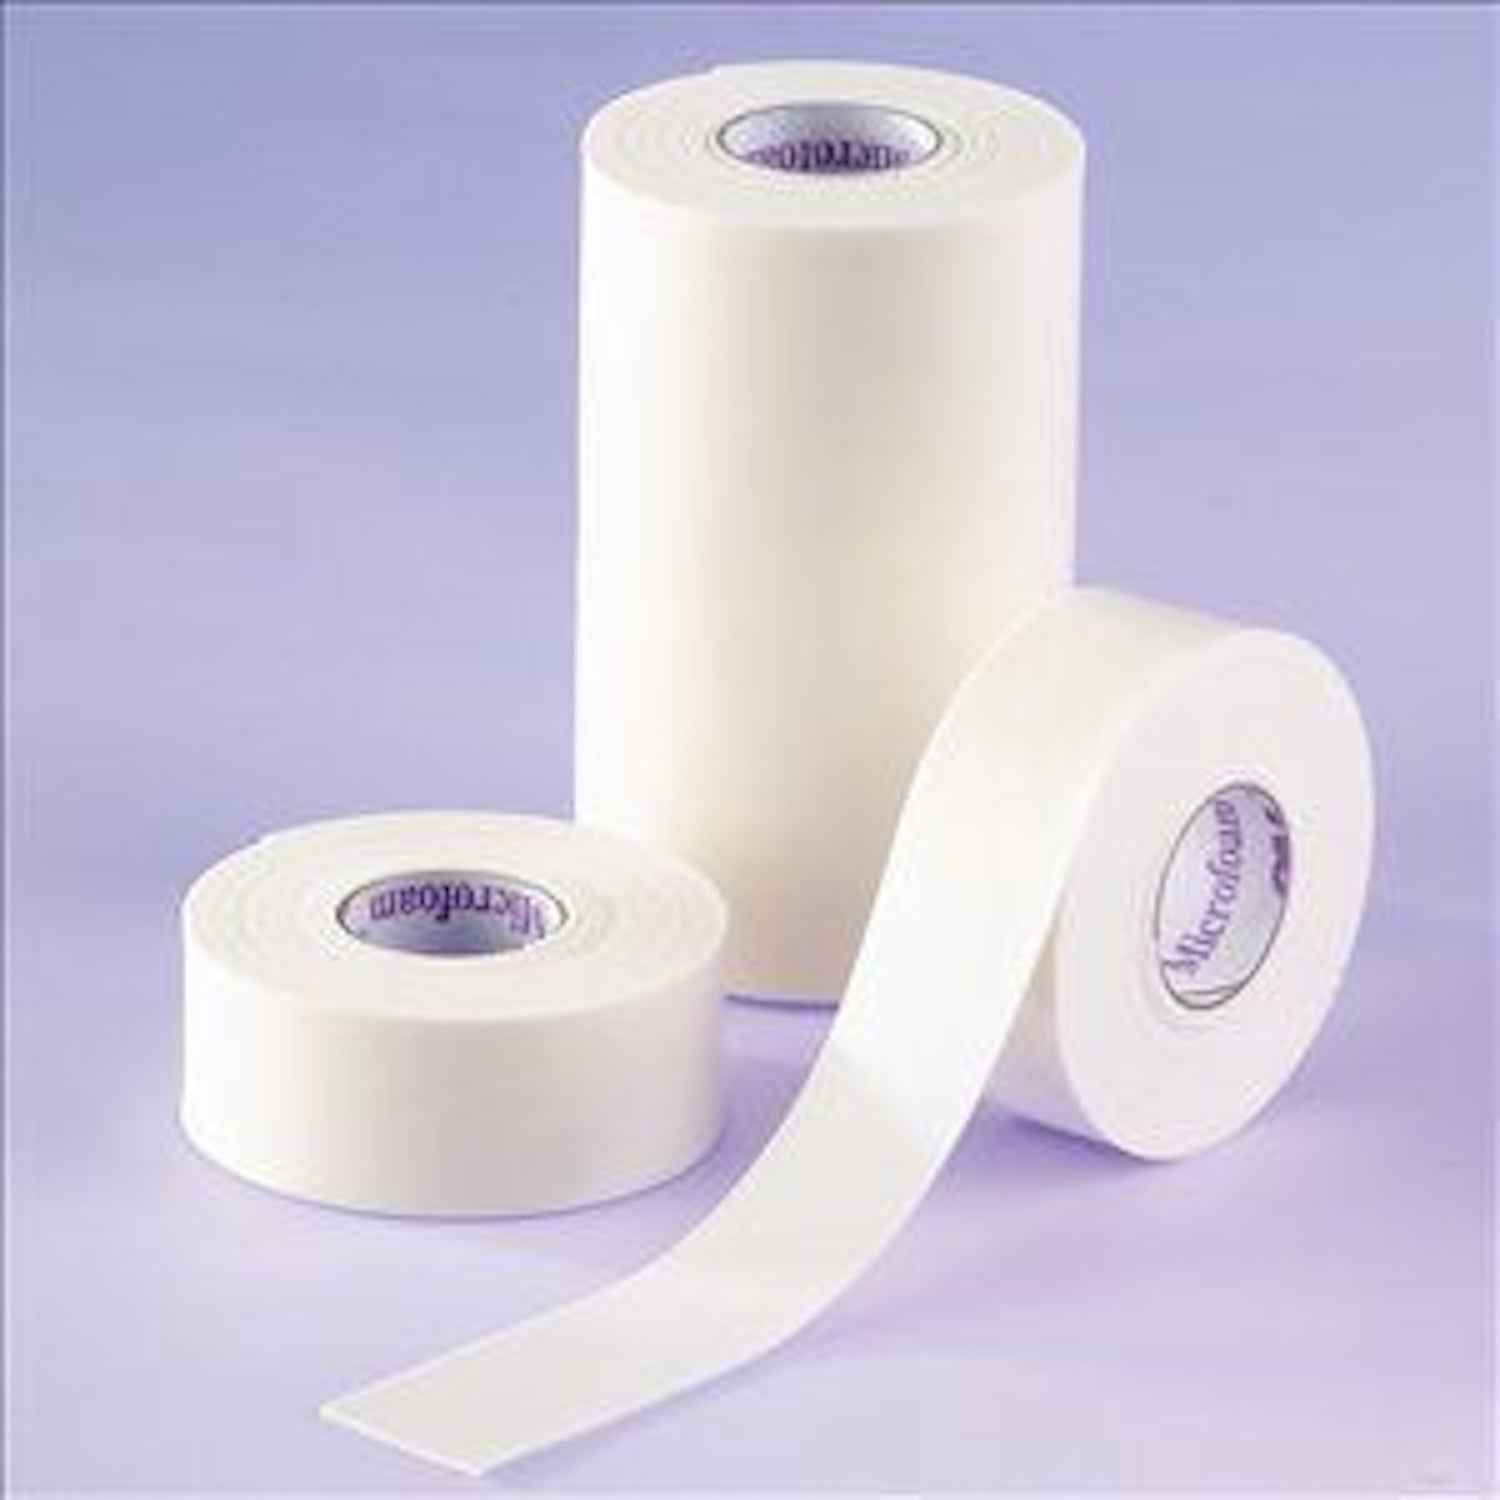 3M Microfoam Surgical Tape | 2.5cm x 5m | Pack of 12 (3)